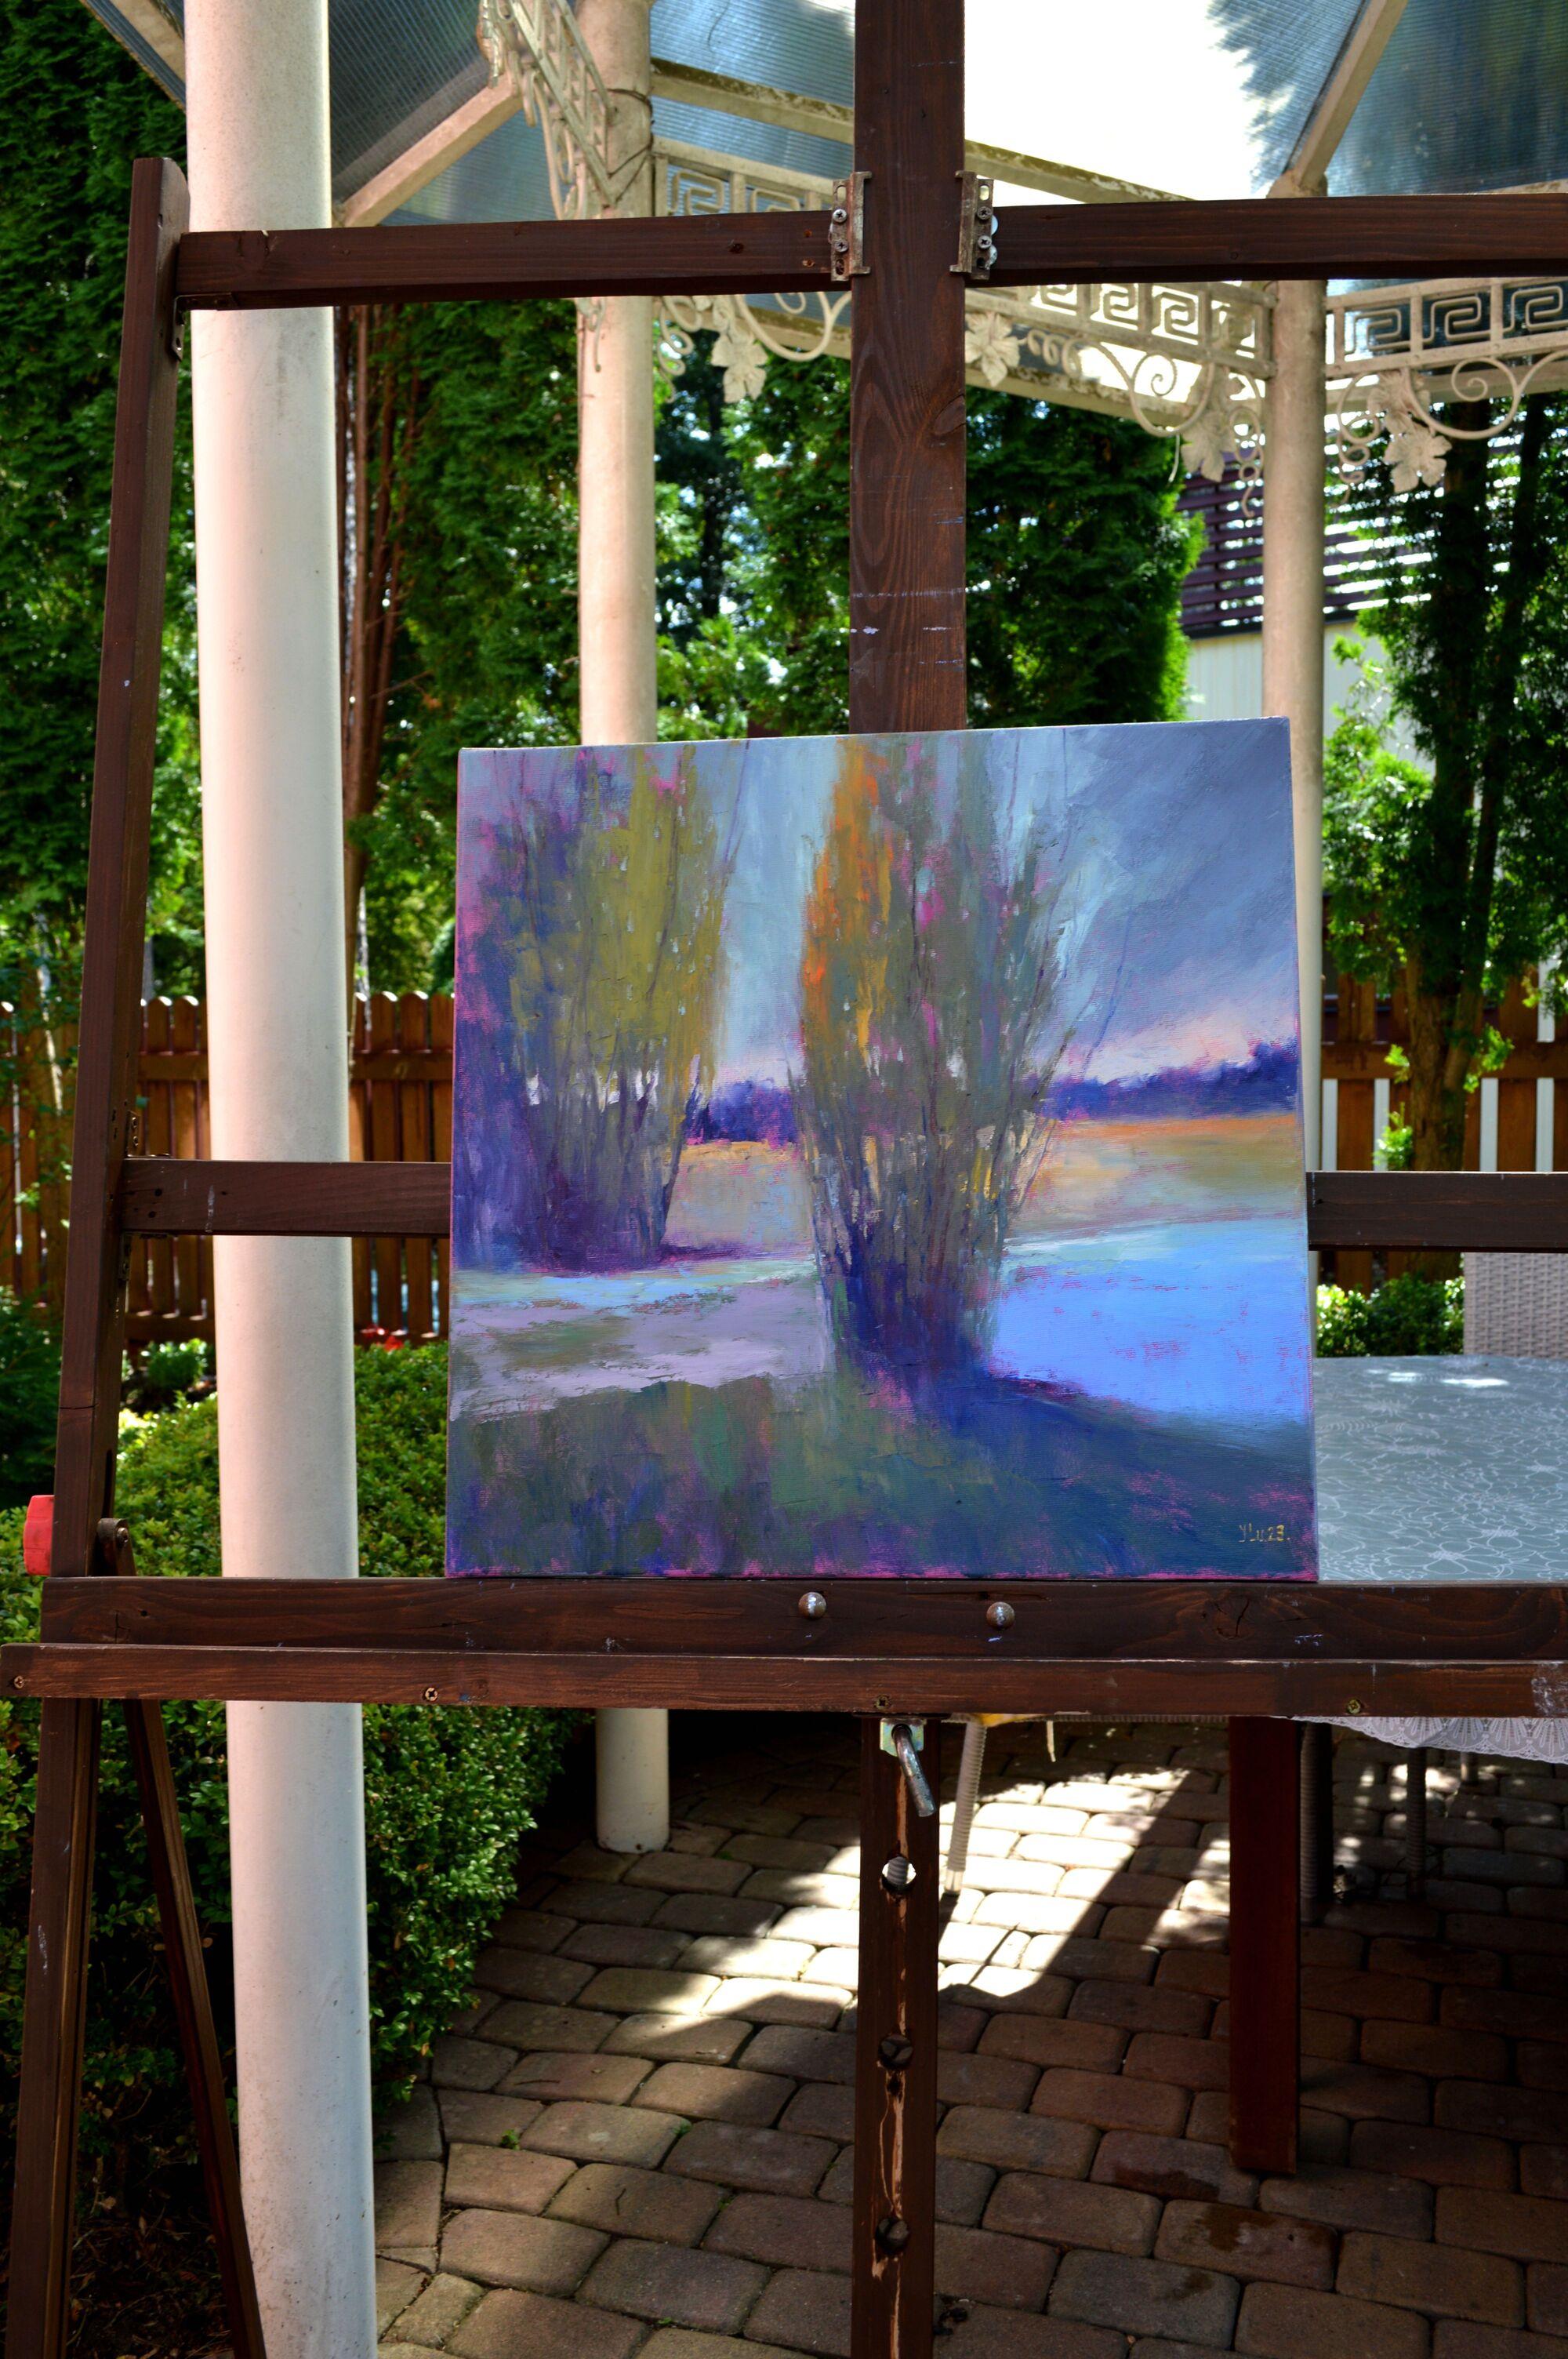 Evening colors by the river - Painting by Elena Lukina